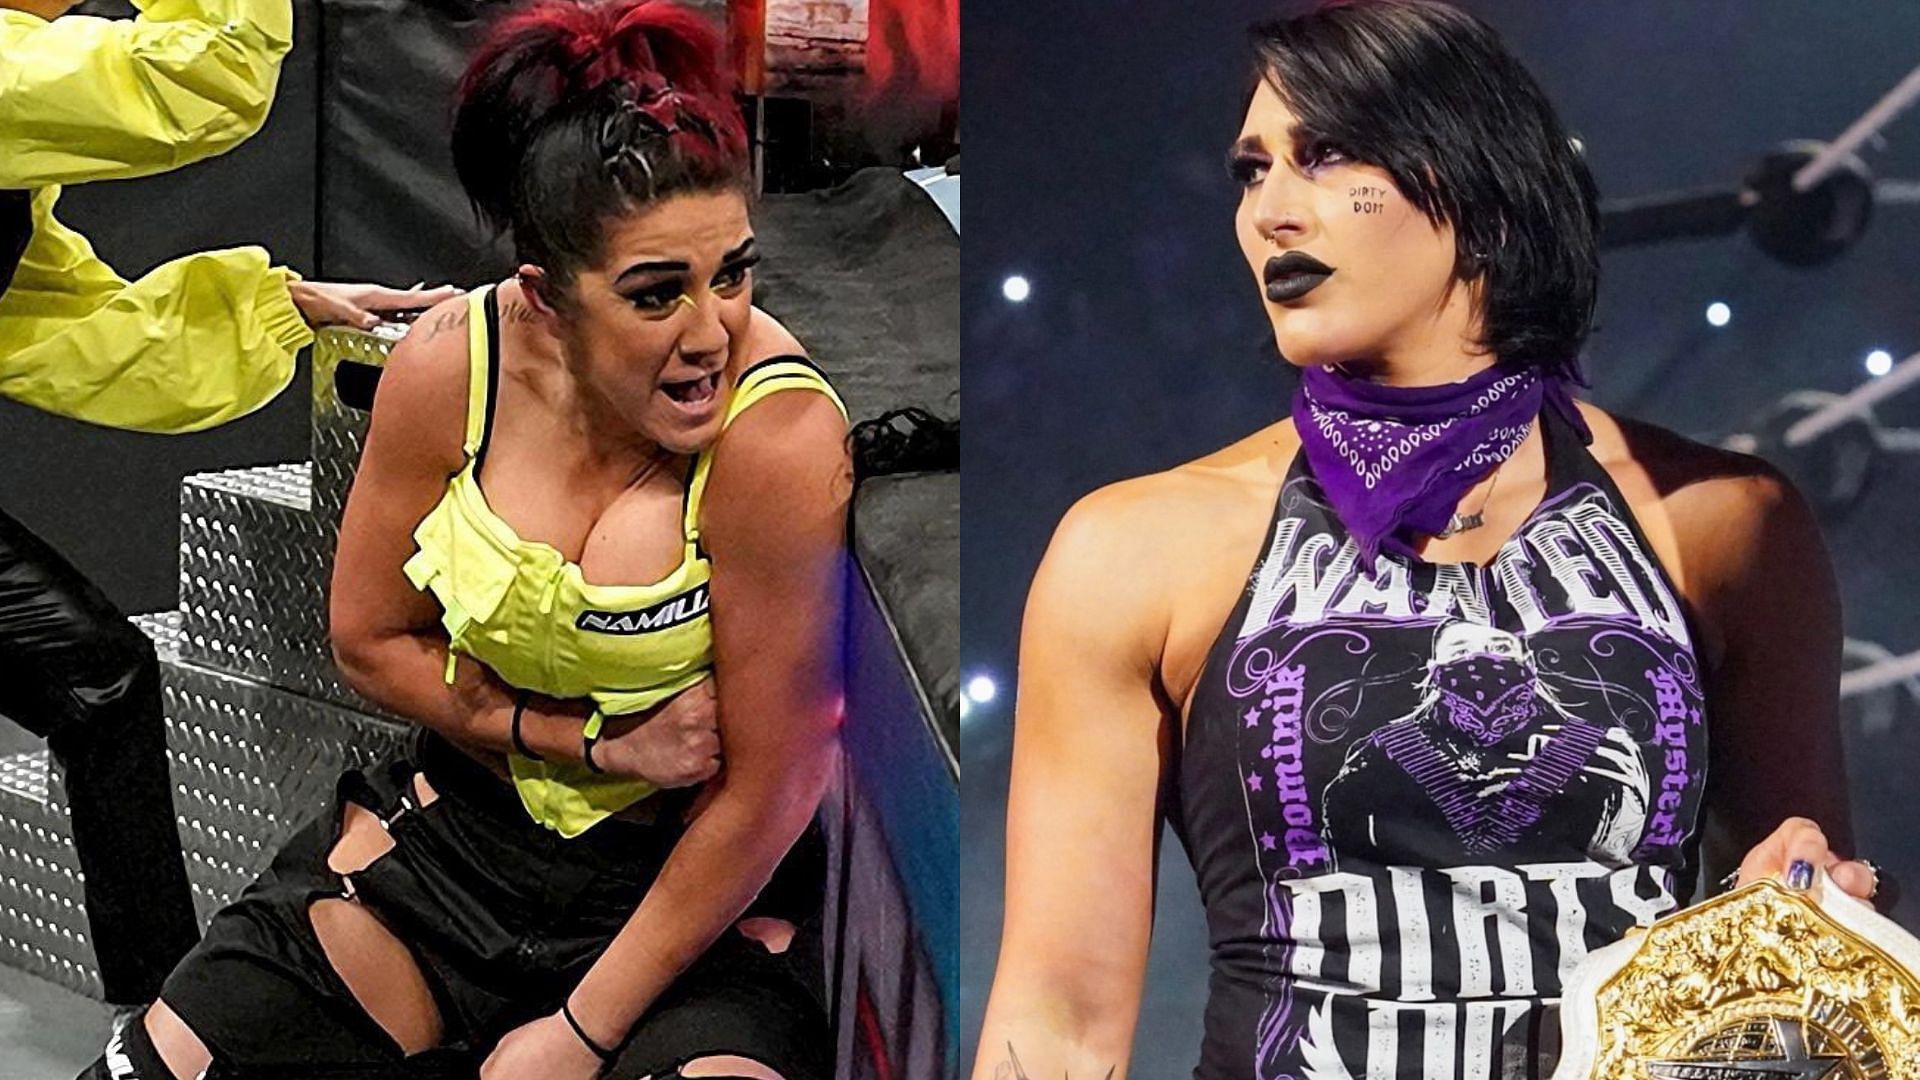 Bayley and Rhea Ripley are currently on different brands